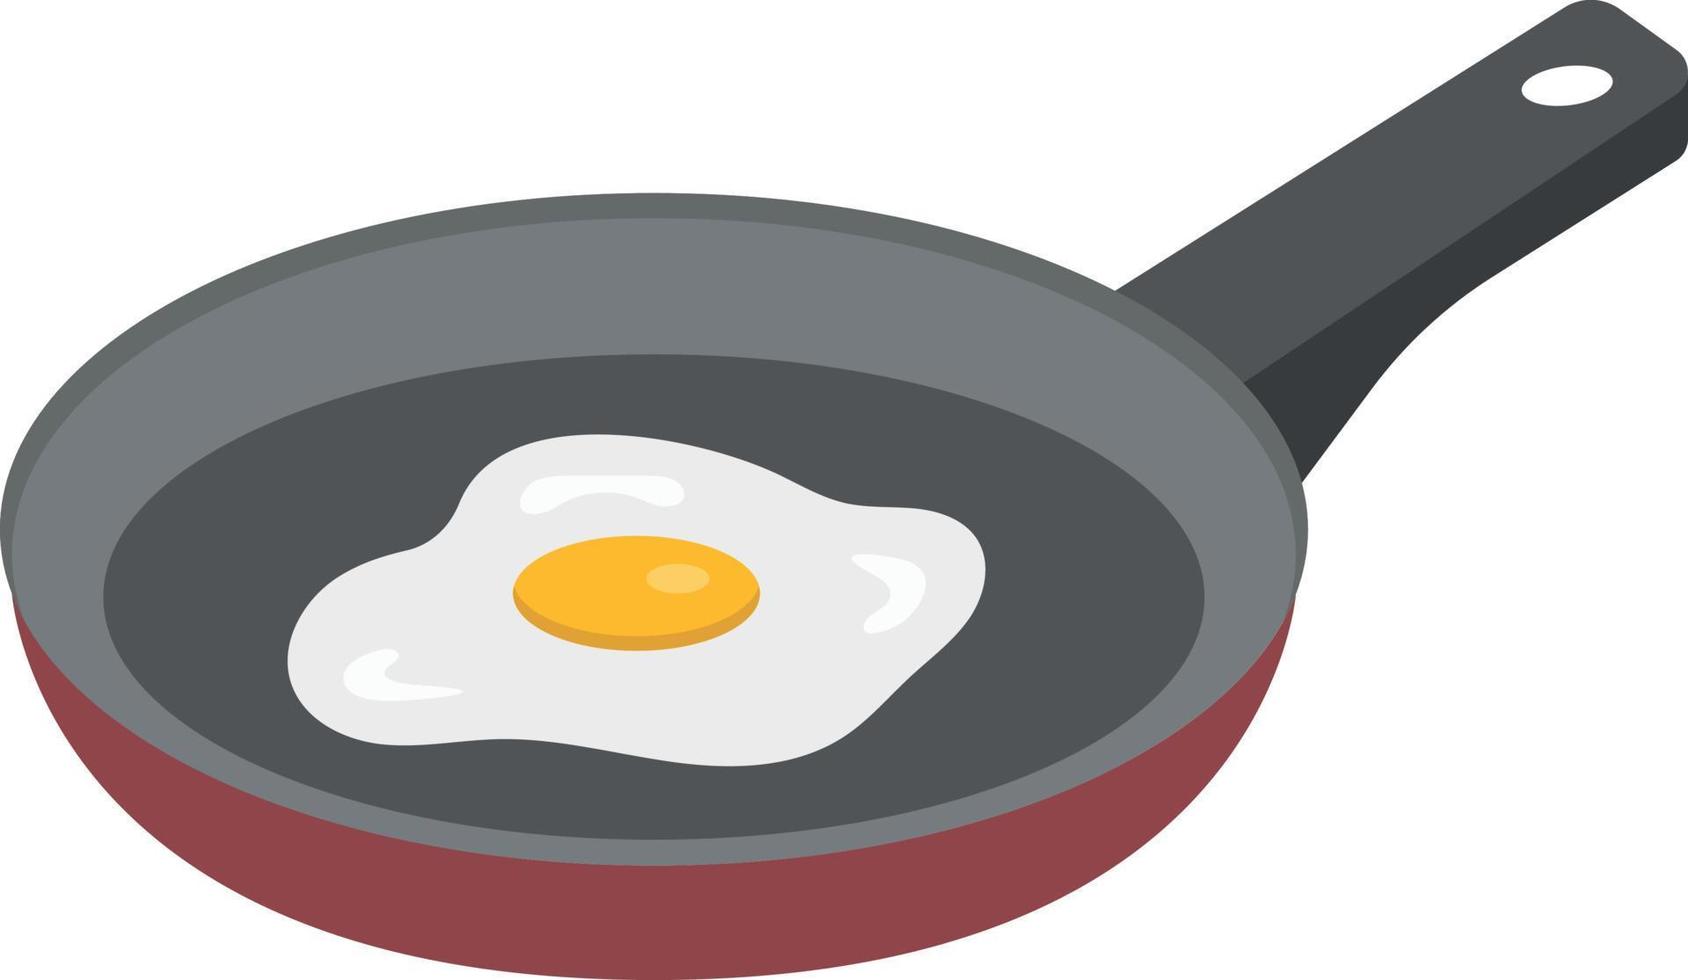 omelet vector illustration on a background.Premium quality symbols.vector icons for concept and graphic design.